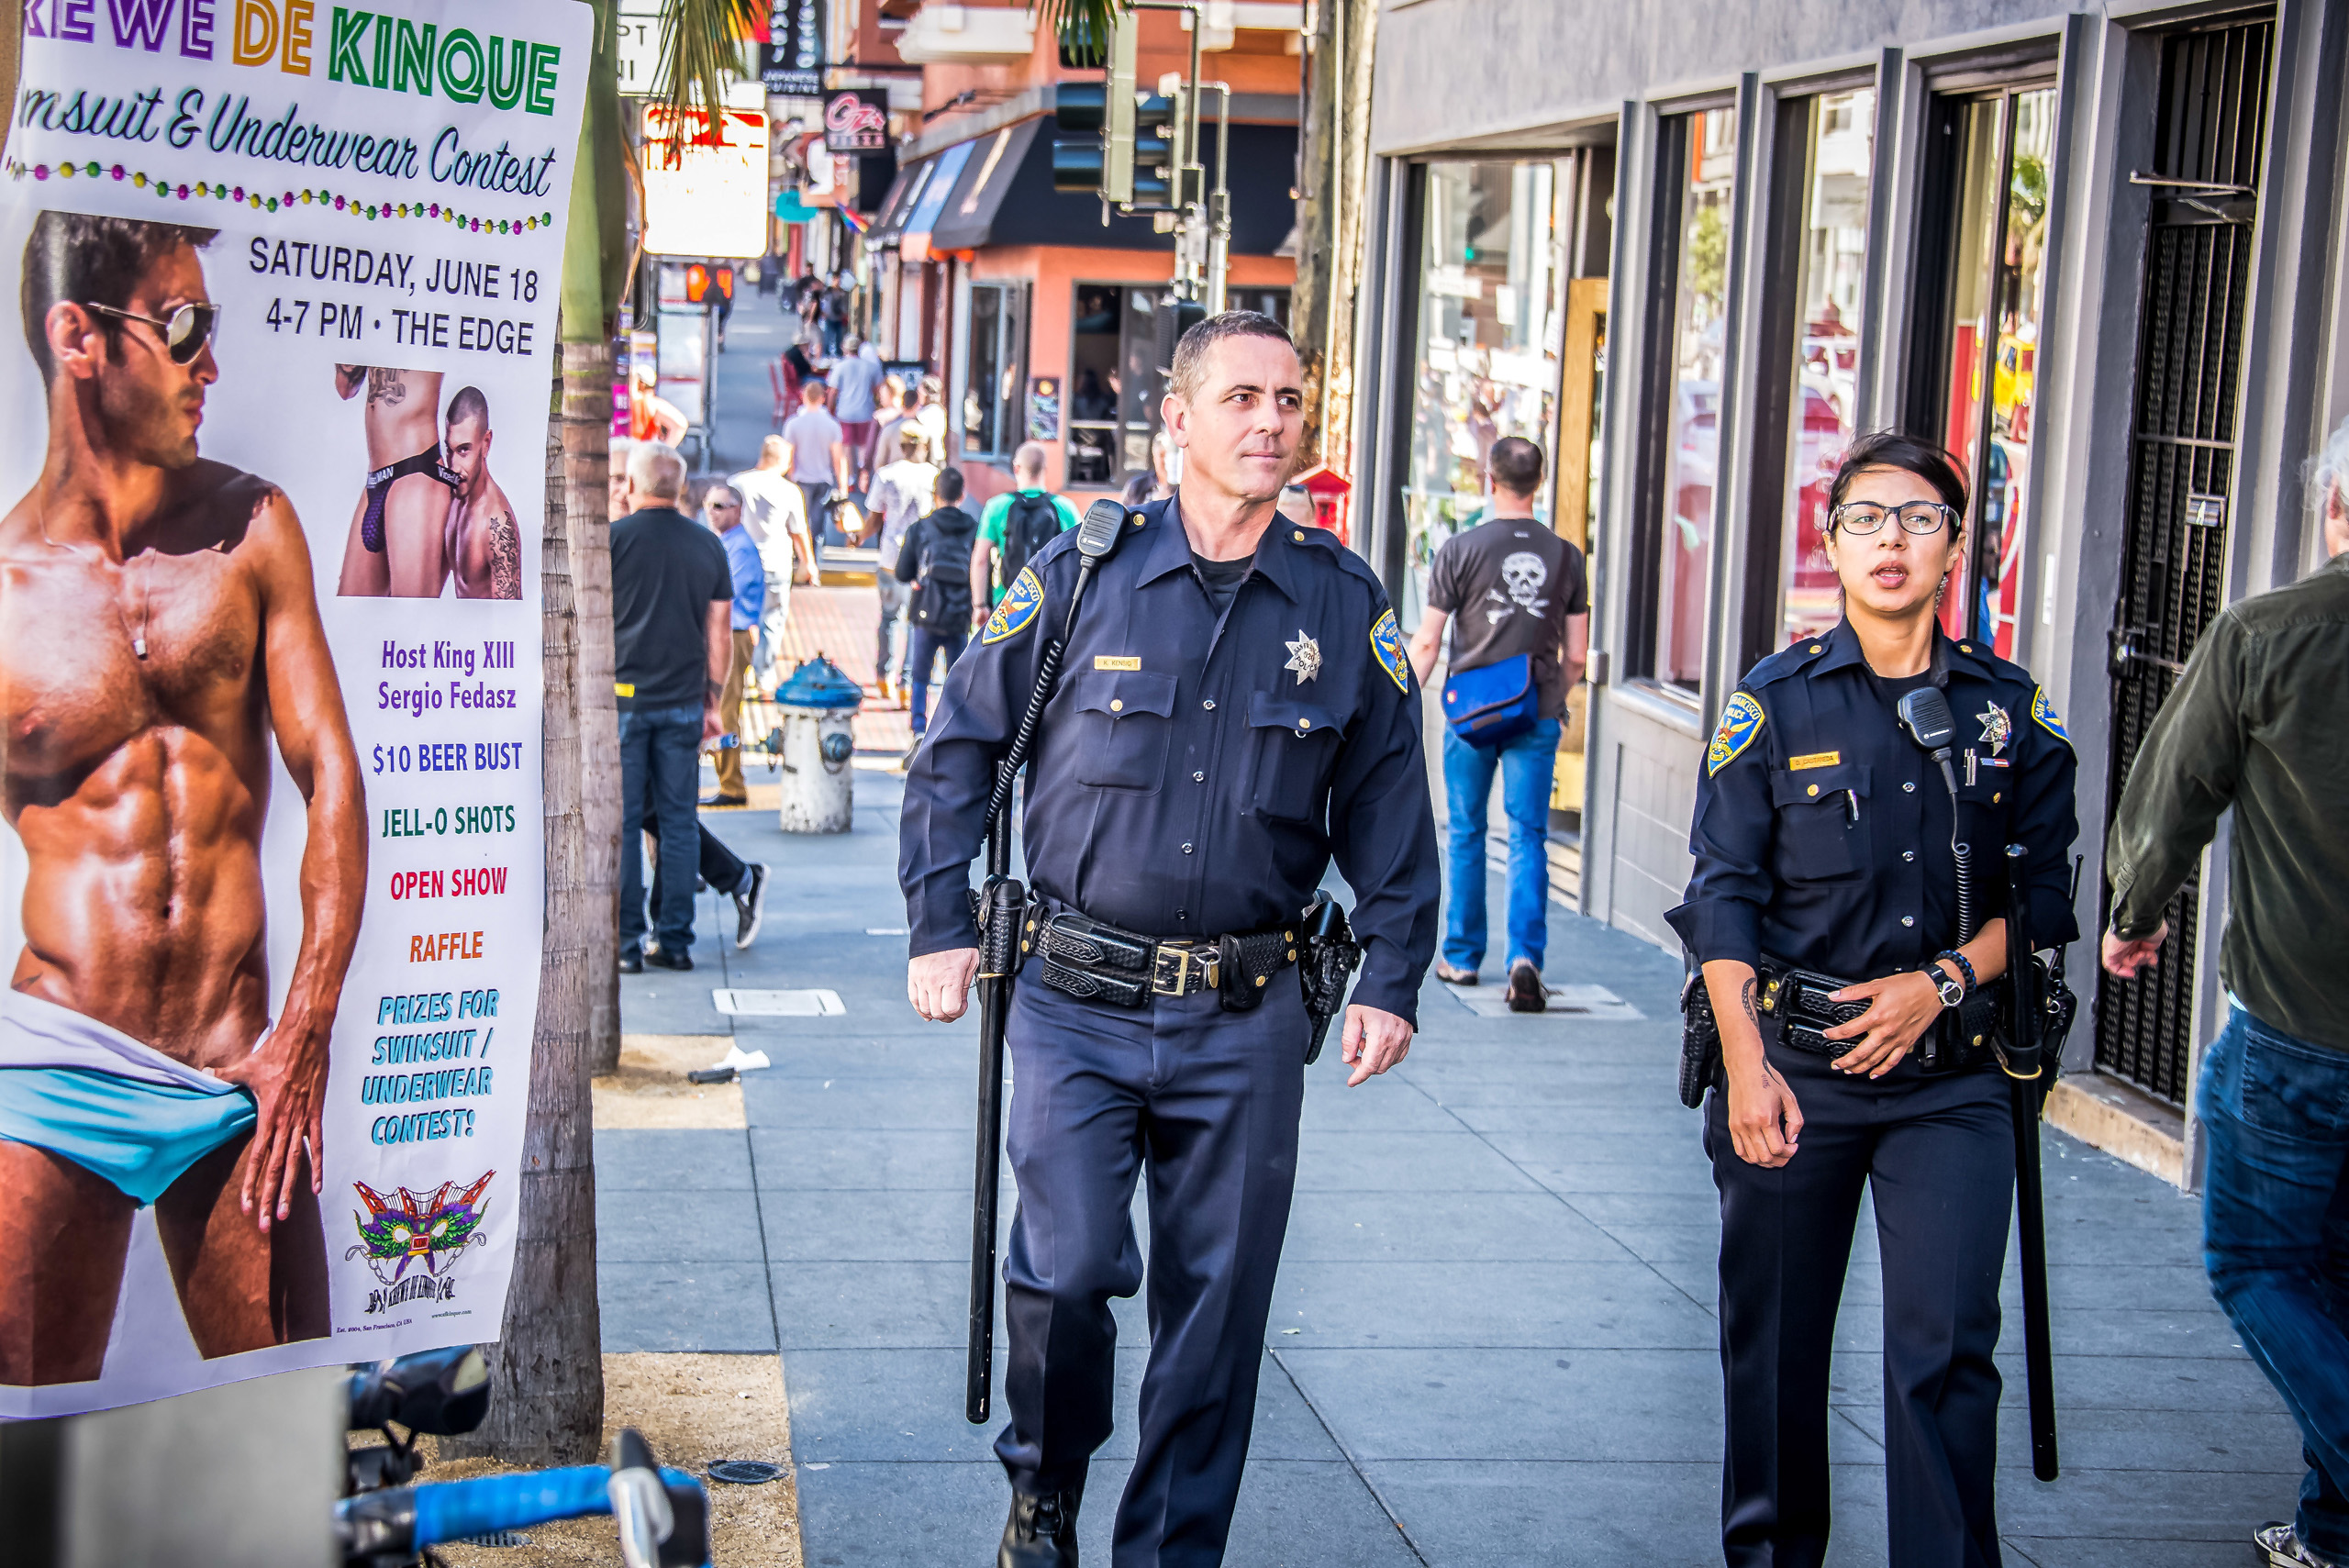 SFPD Officers patrol Castro Street in San Francisco on June 18, 2016. (Pacific Press—LightRocket/Getty Images)